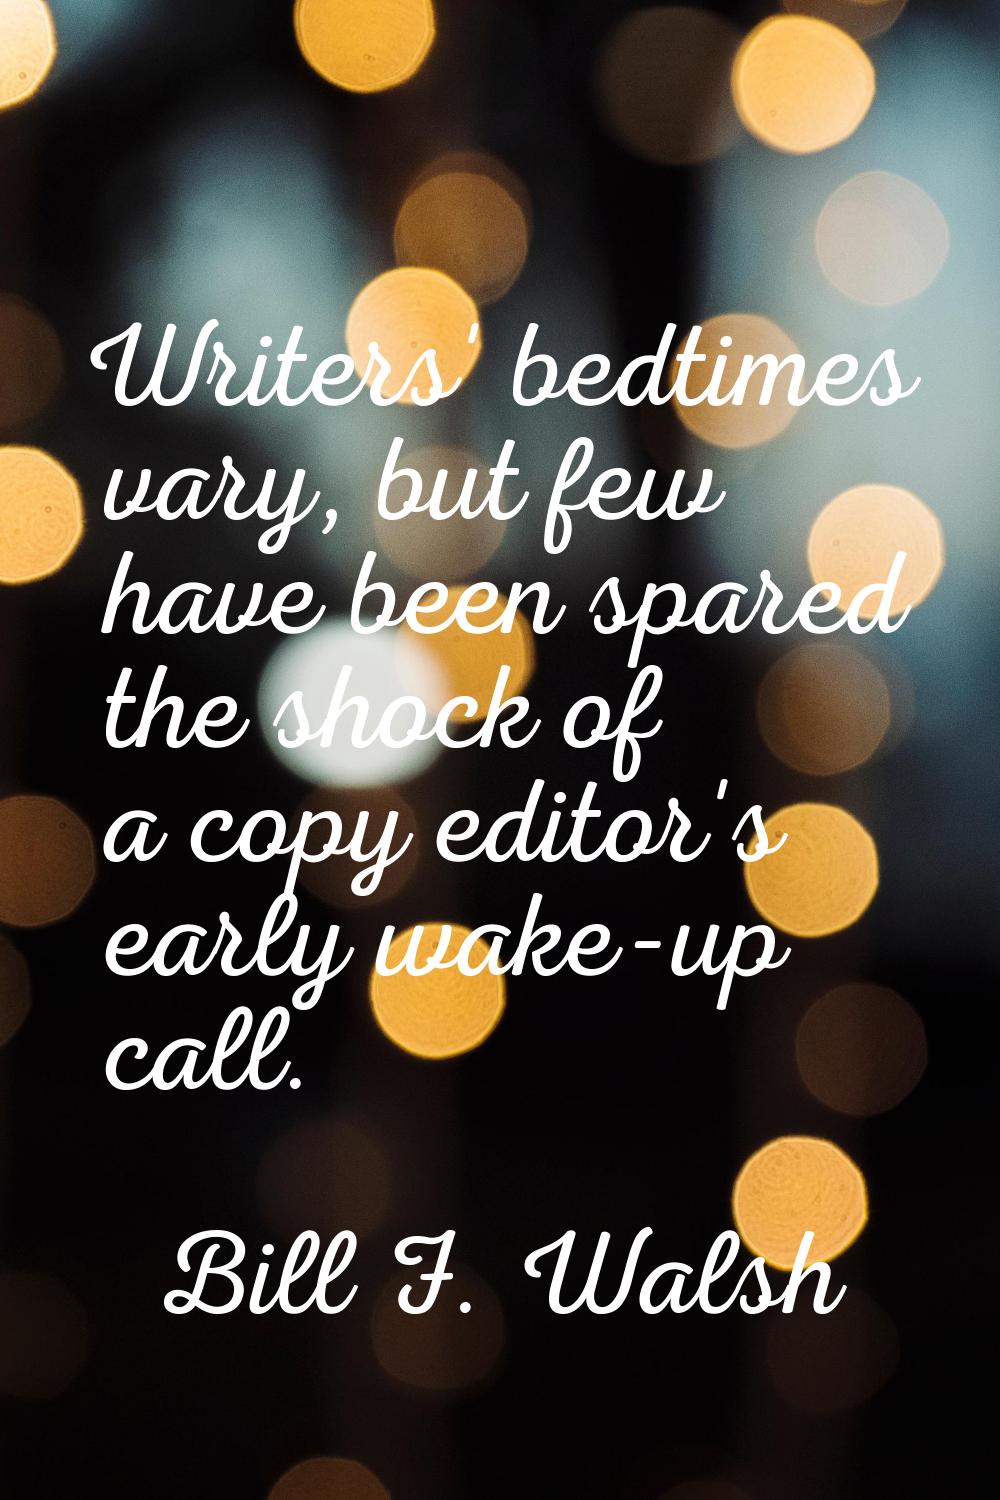 Writers' bedtimes vary, but few have been spared the shock of a copy editor's early wake-up call.